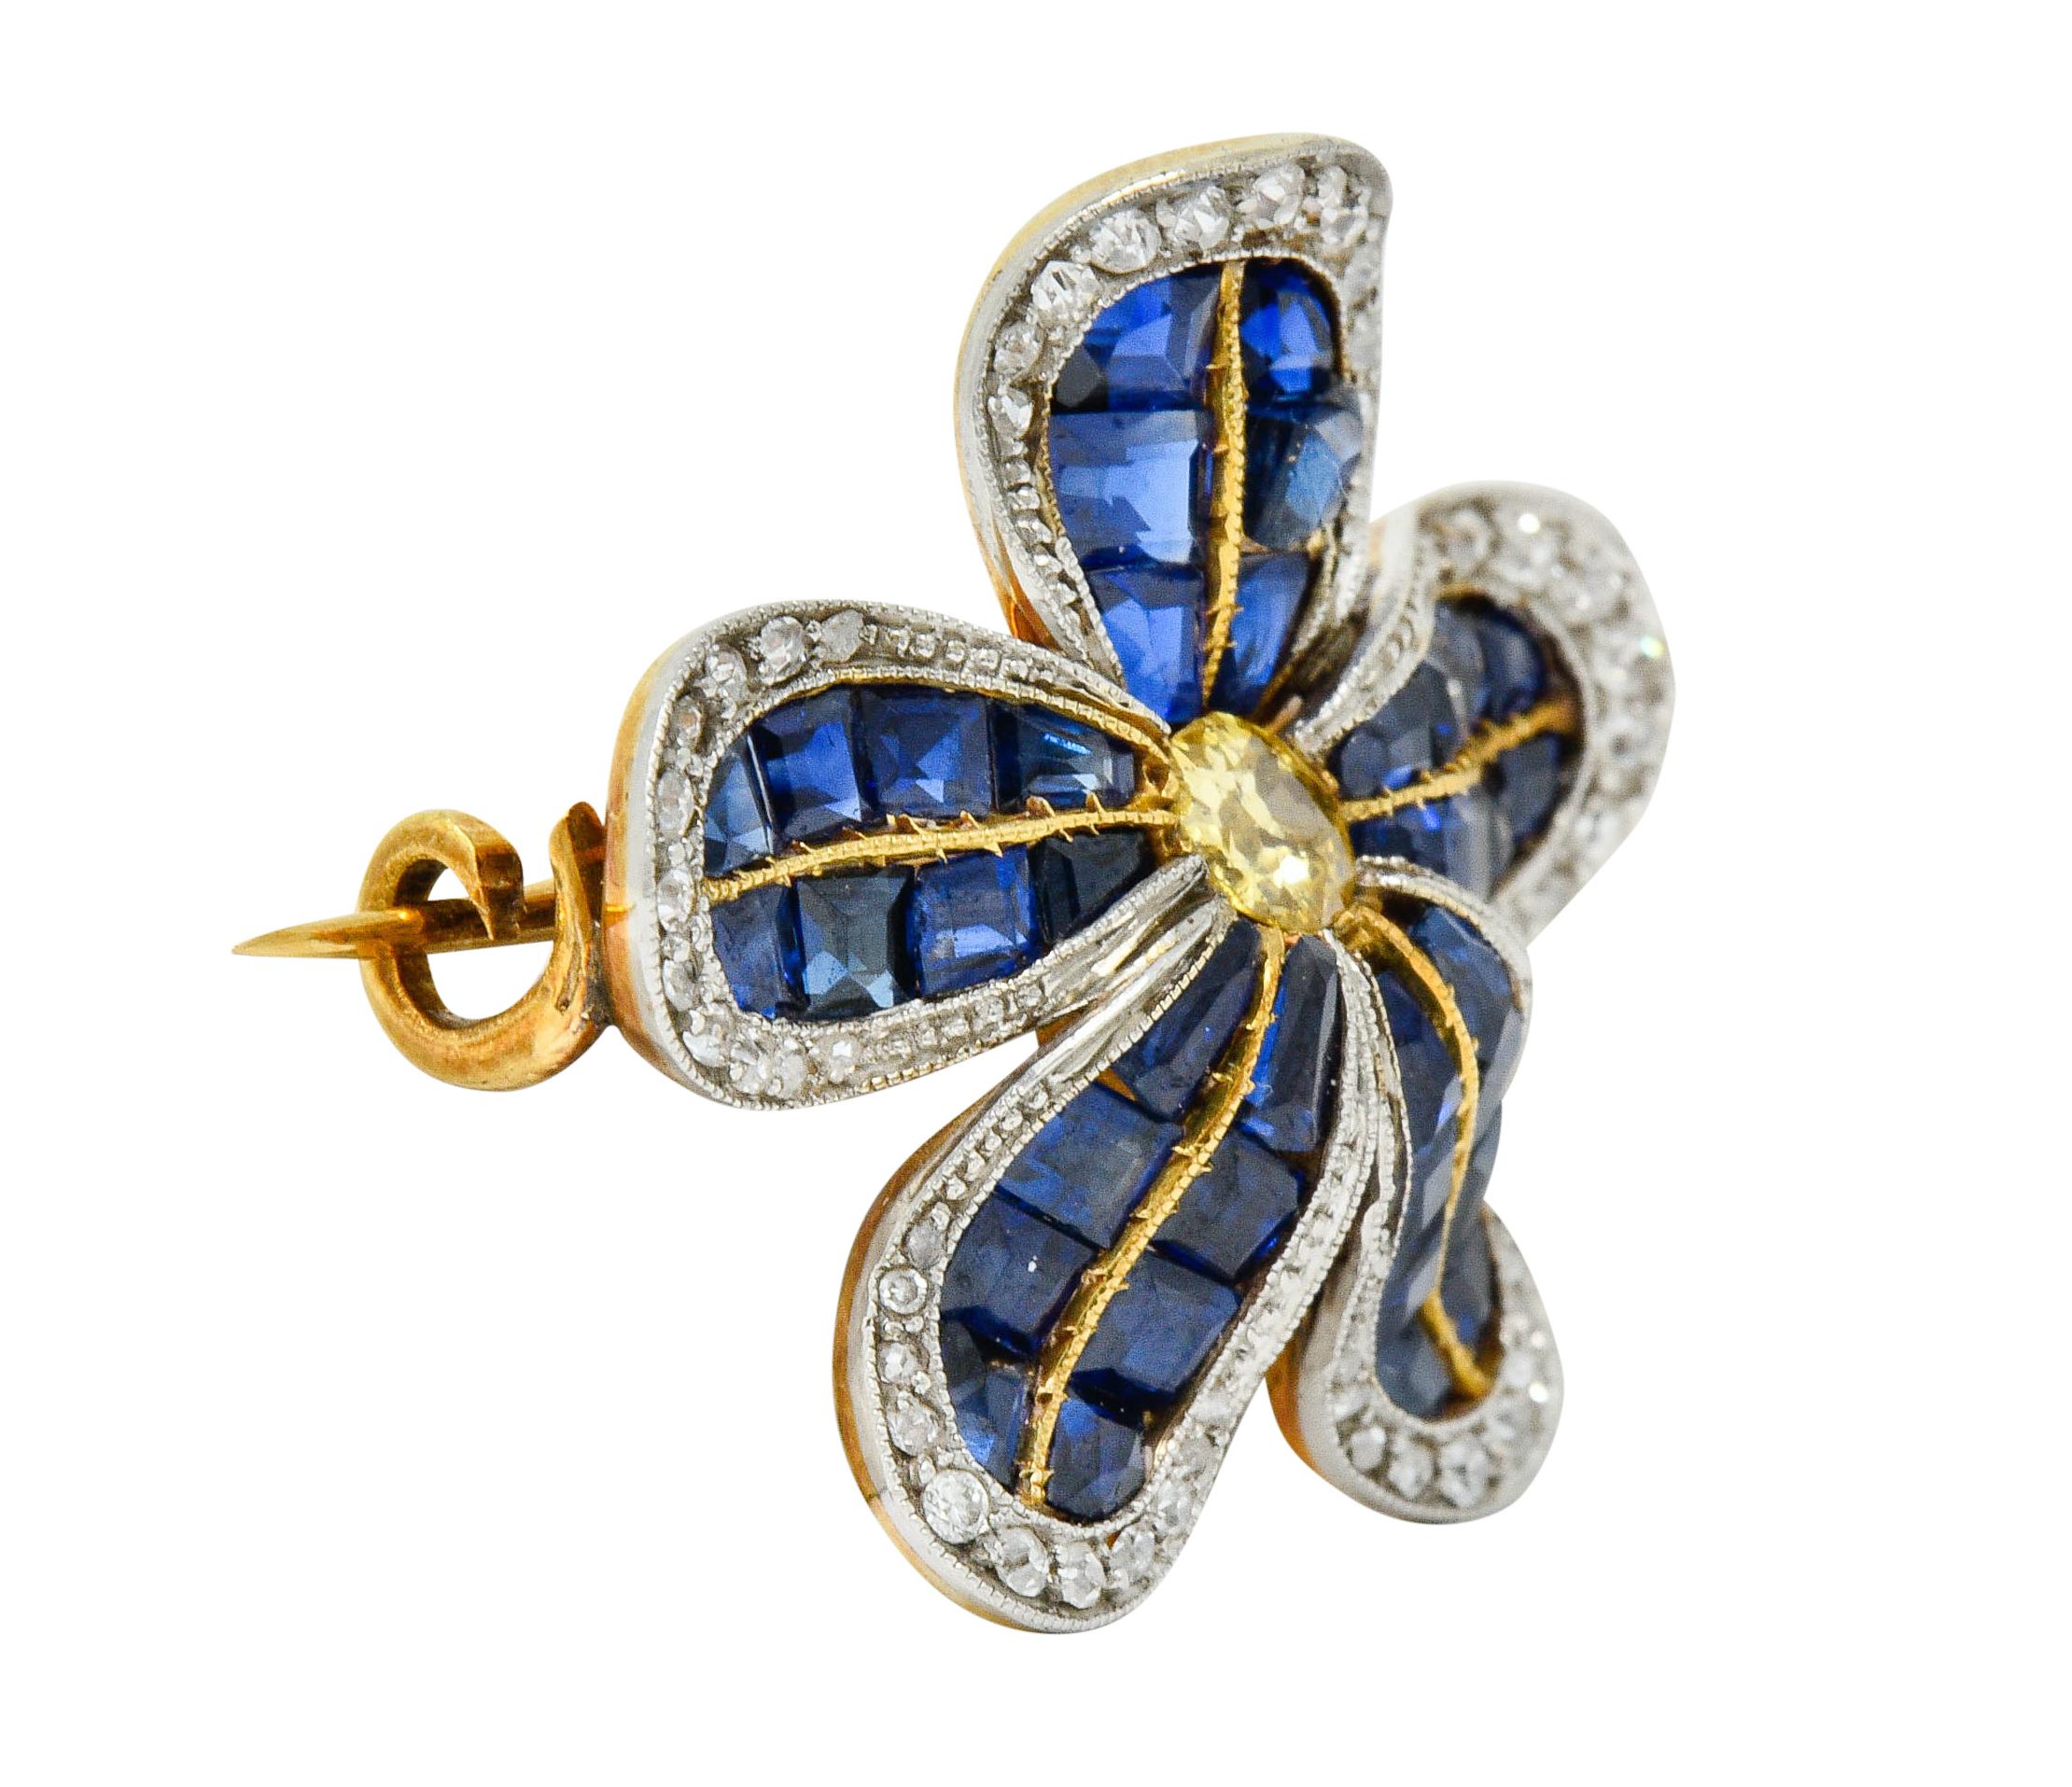 Brooch is designed as a dynamically formed five petaled flower

Centering an old mine cut fancy colored diamond weighing approximately 0.22 carat
Fancy yellow in color with I clarity

Petals are invisibly set with calibrè cut sapphires weighing in